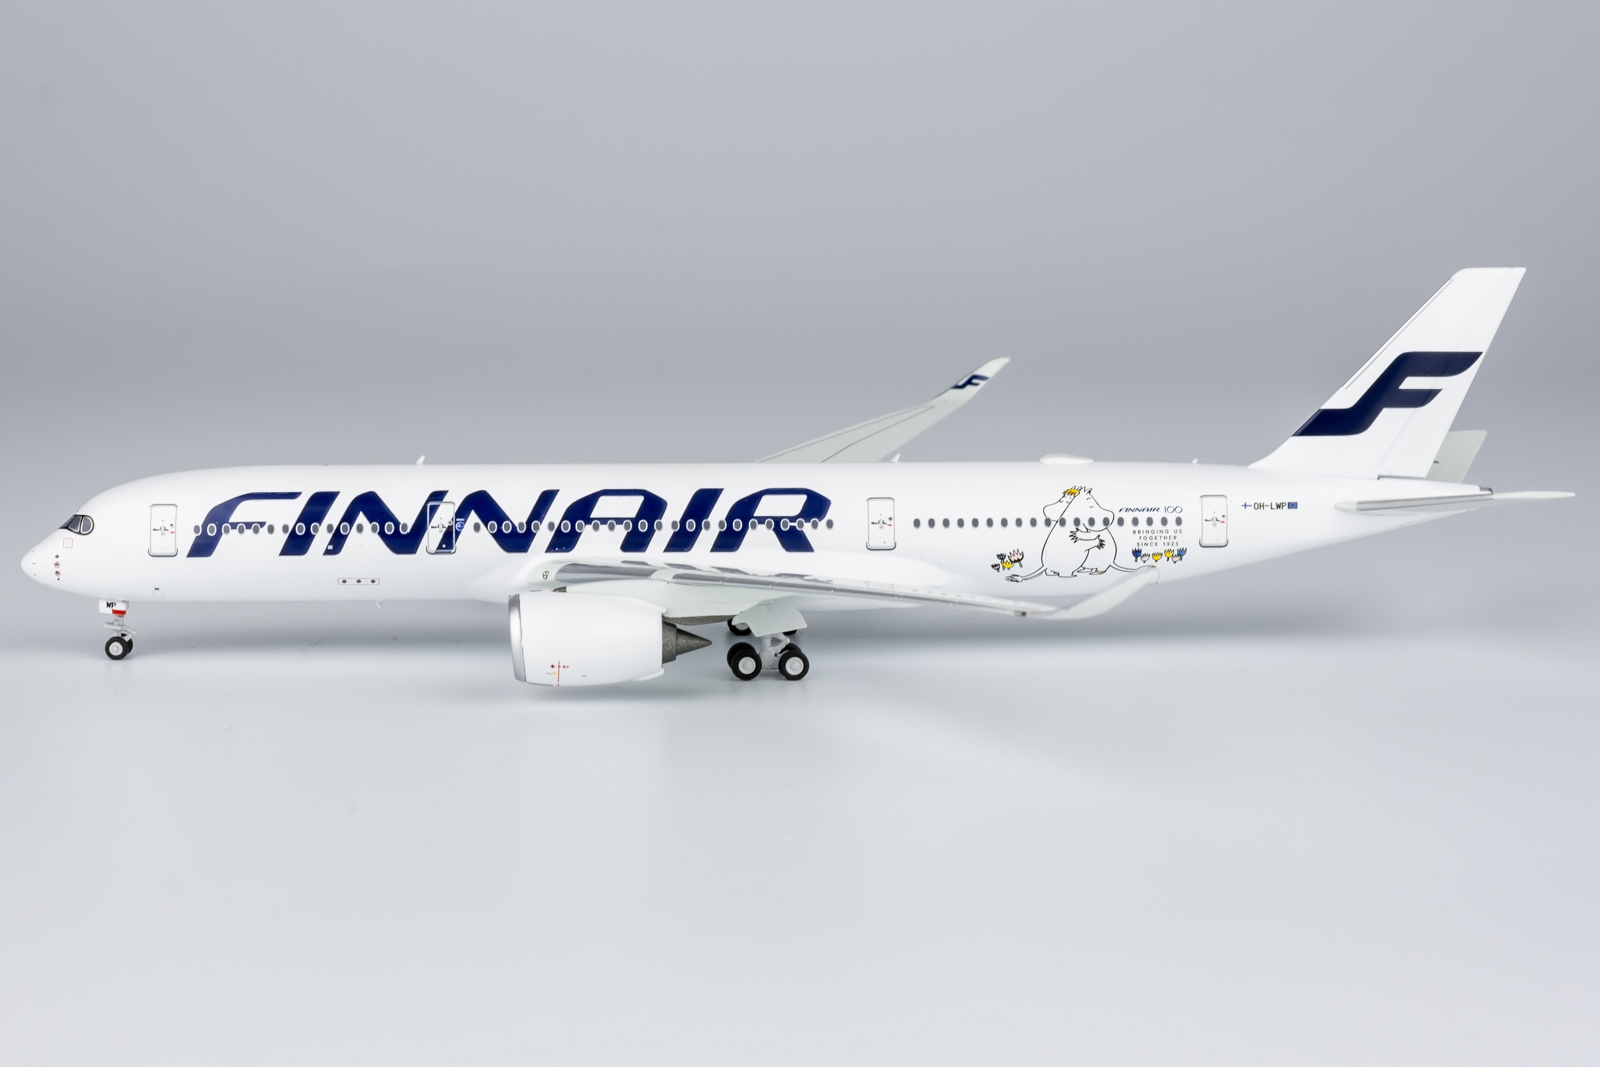 NG Models 1:400 Finnair OH-LWP Airbus A350-900 - Bedfordshire Diecast